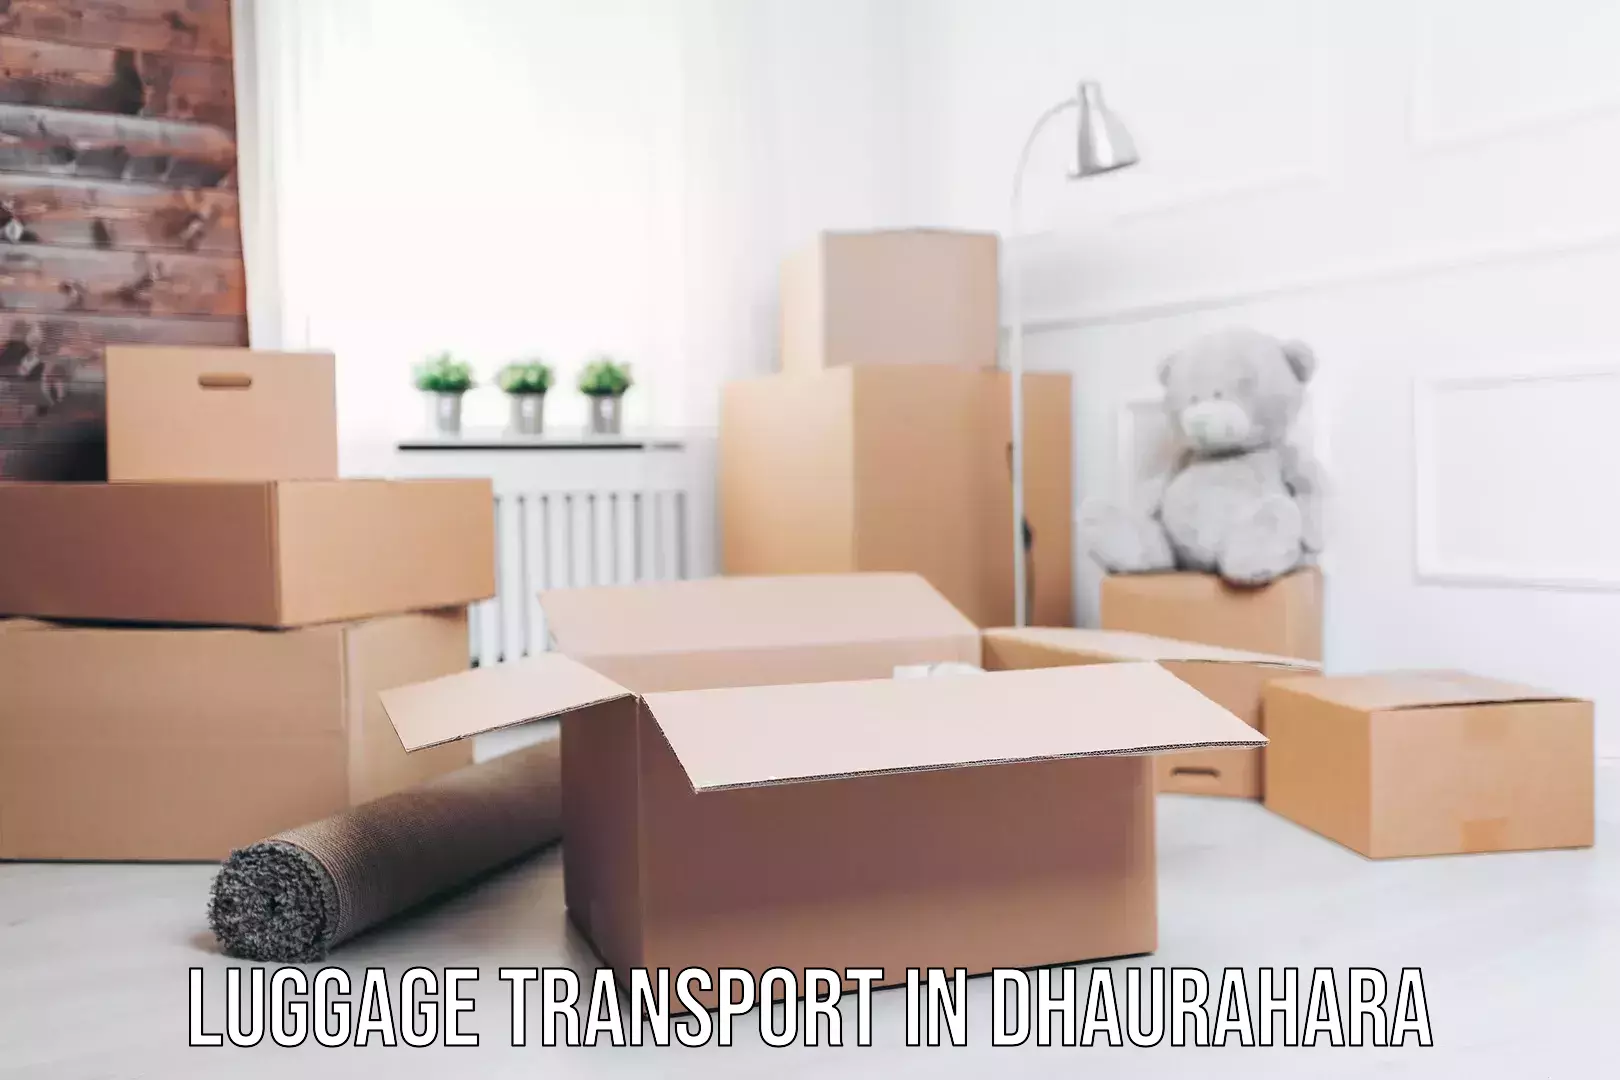 Luggage shipping service in Dhaurahara